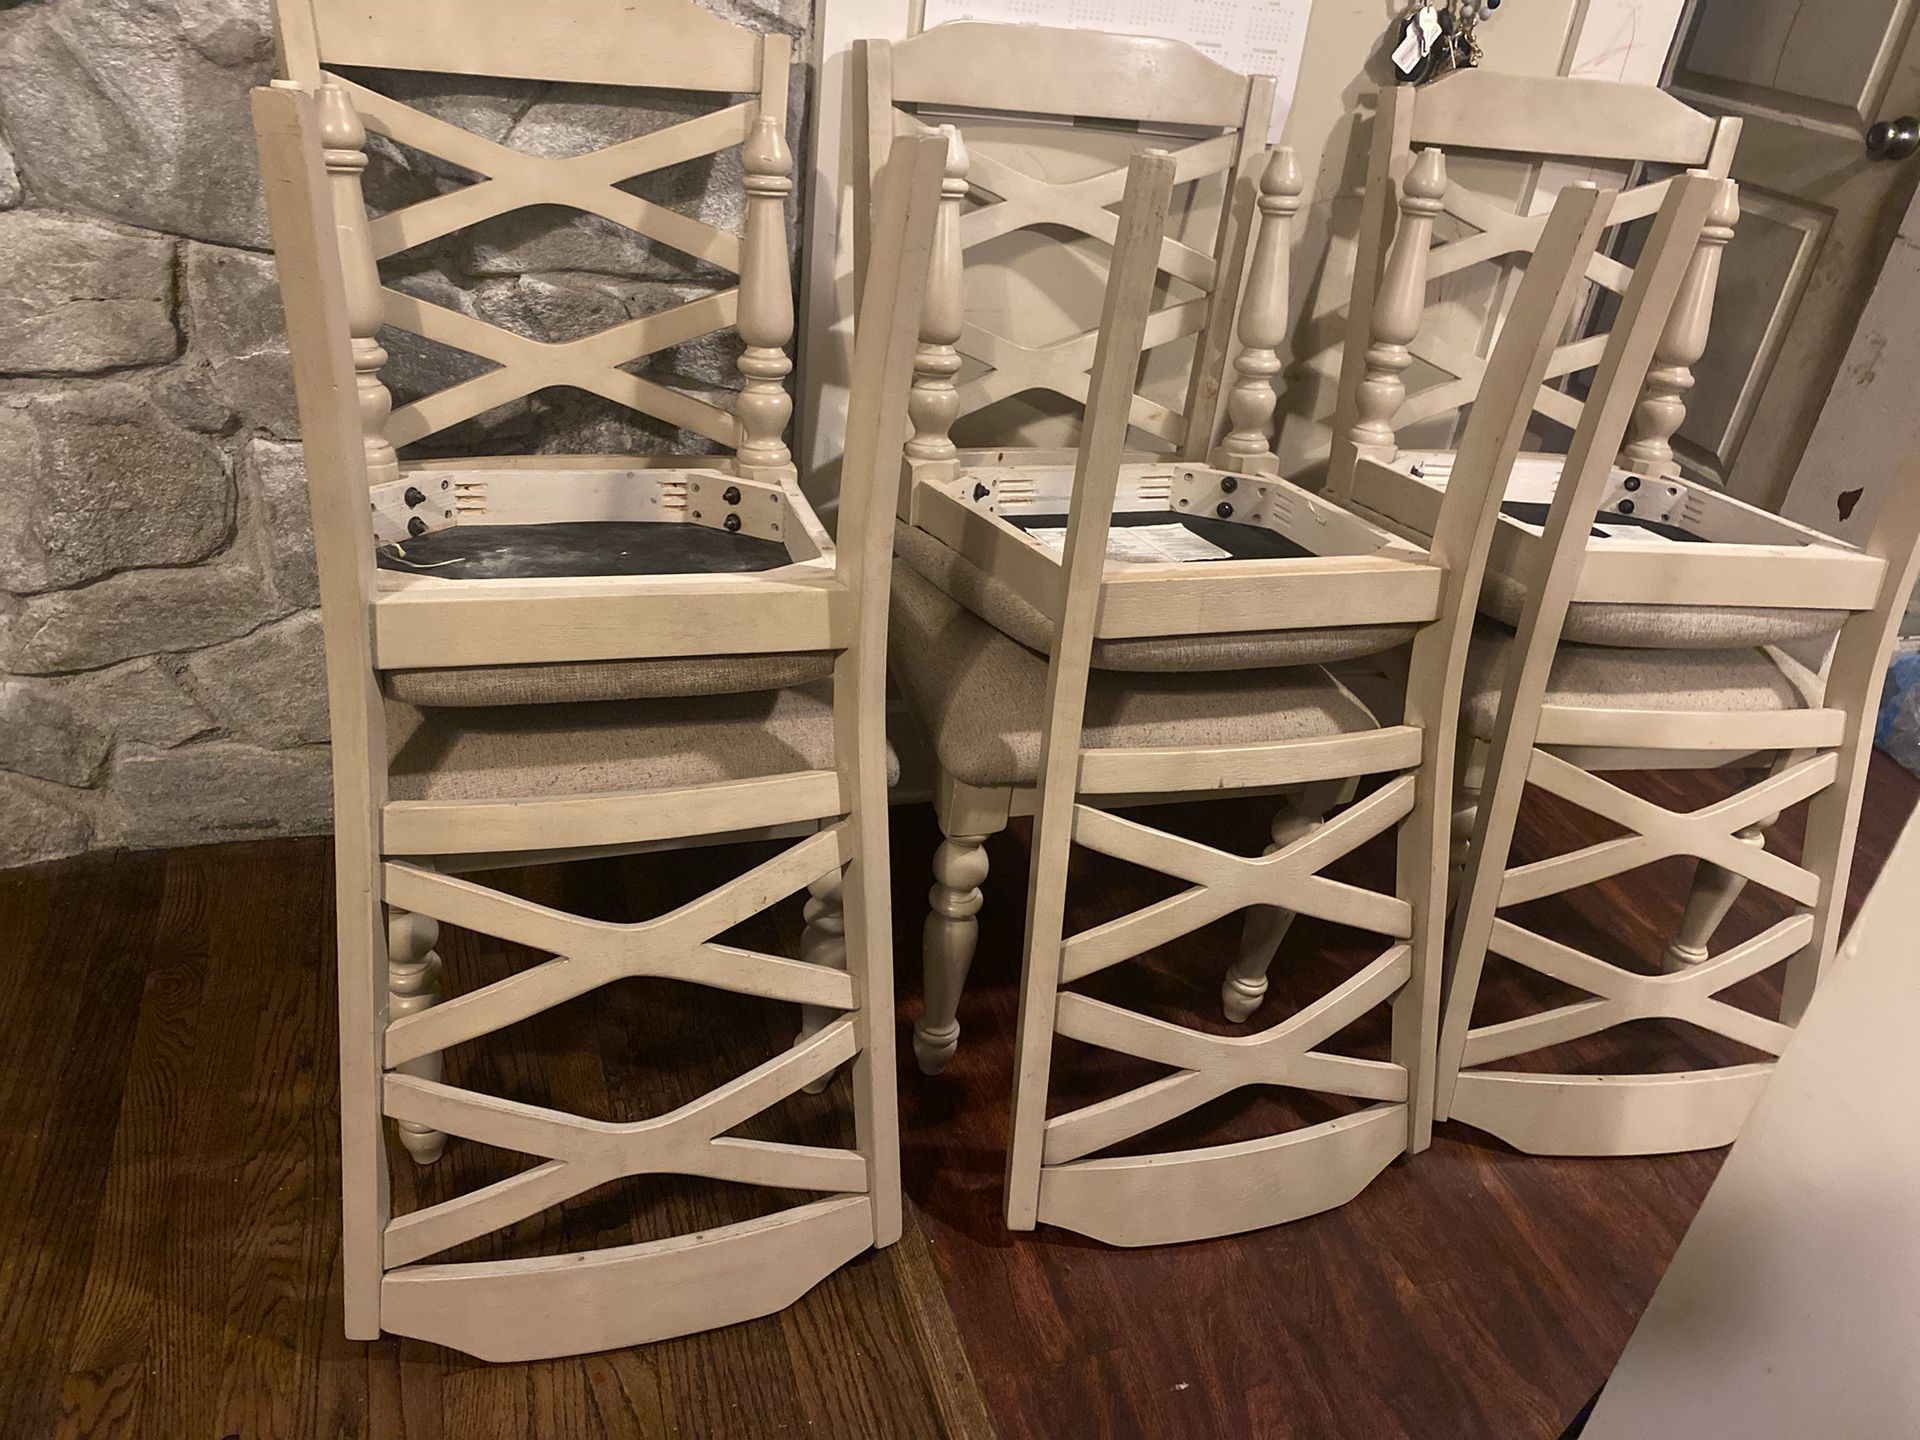 Table With 6 Chairs